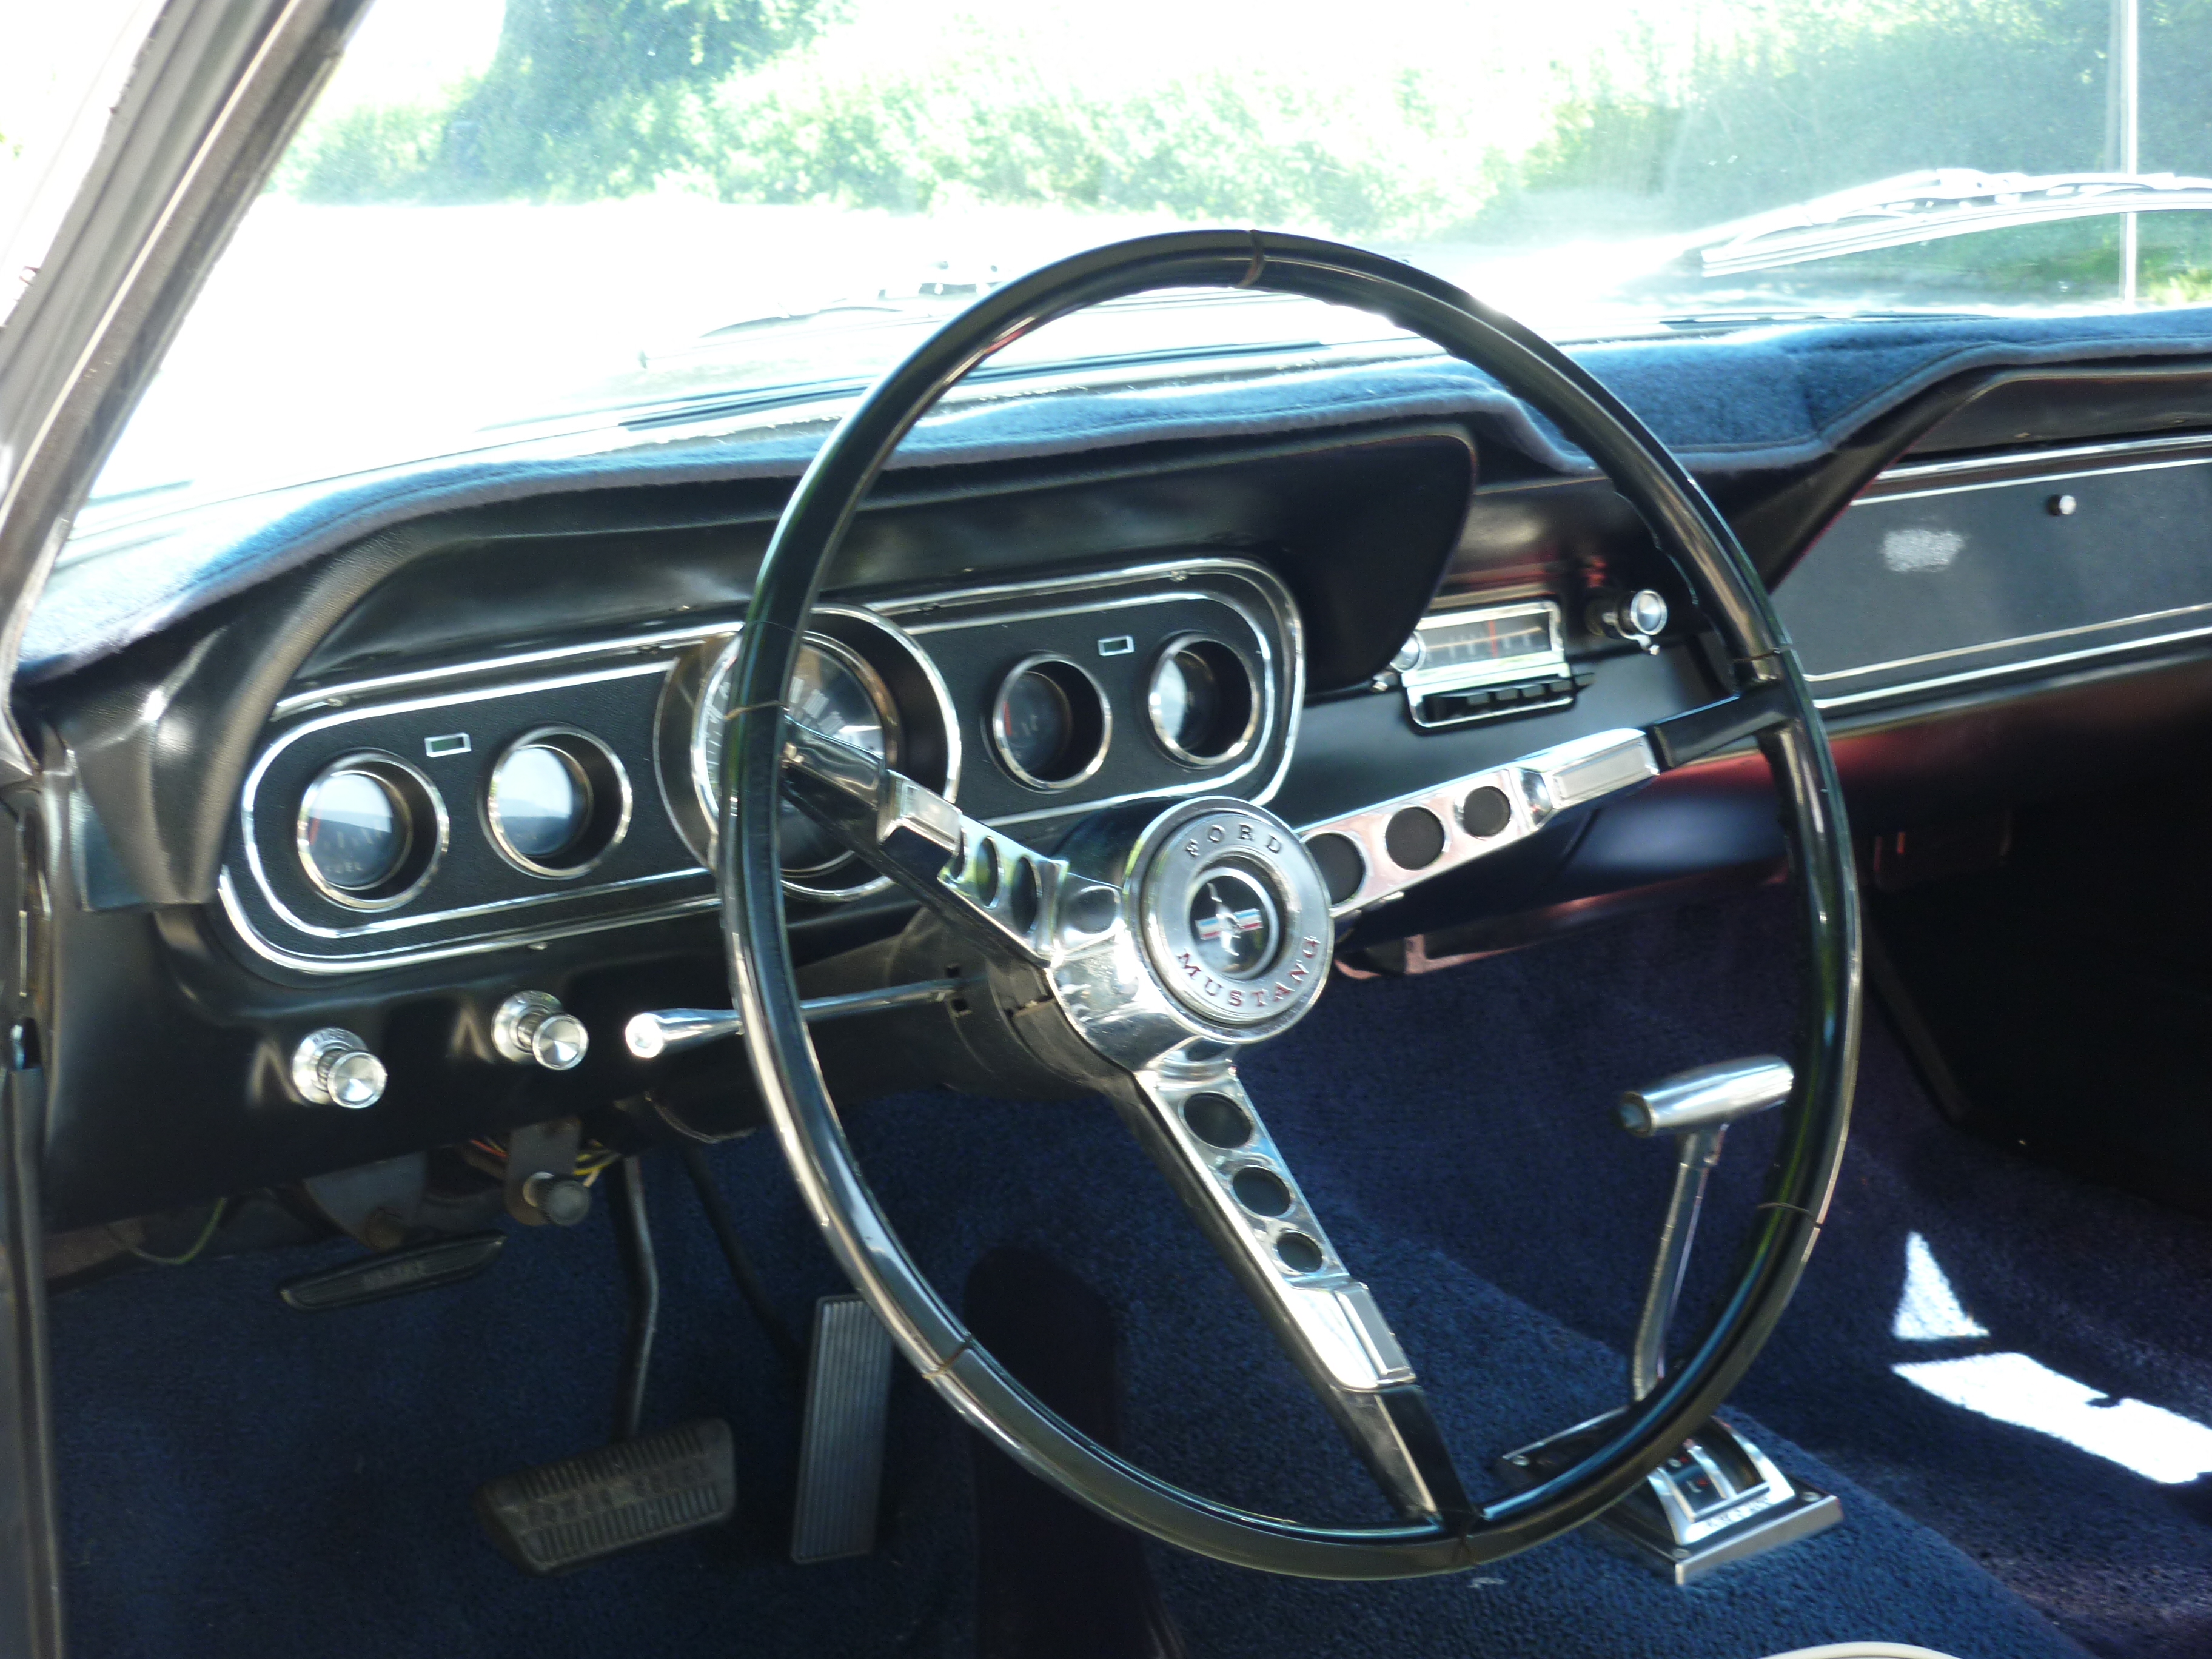 1966 Ford Mustang 289 cu-in V8 Convertible Driven